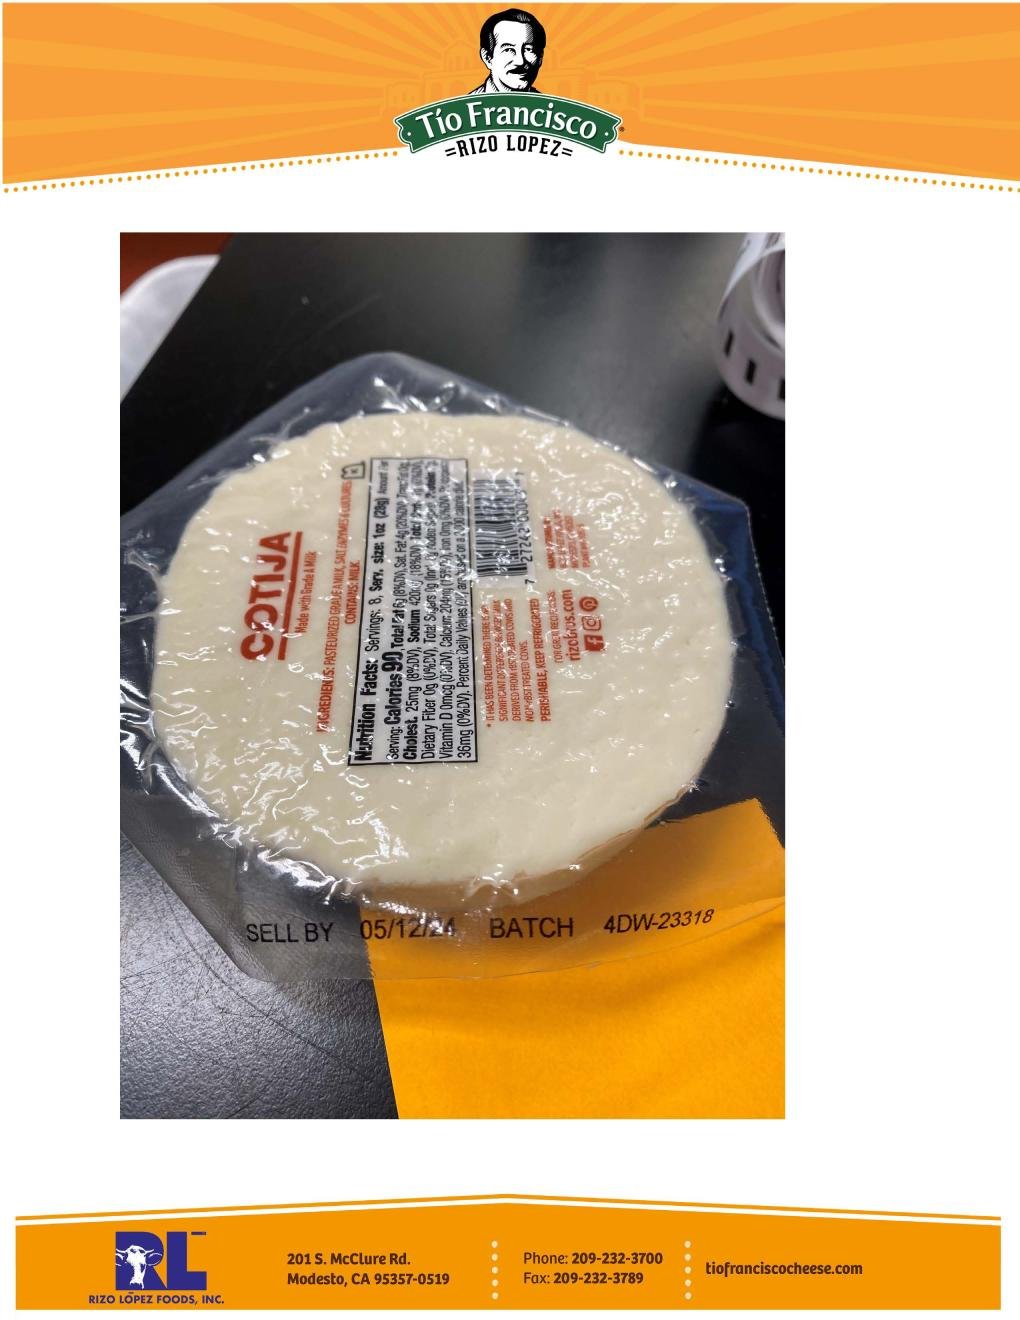 Rizo-López Foods, Inc. Voluntarily Recalls Dairy Products Because of Possible Listeria Contamination